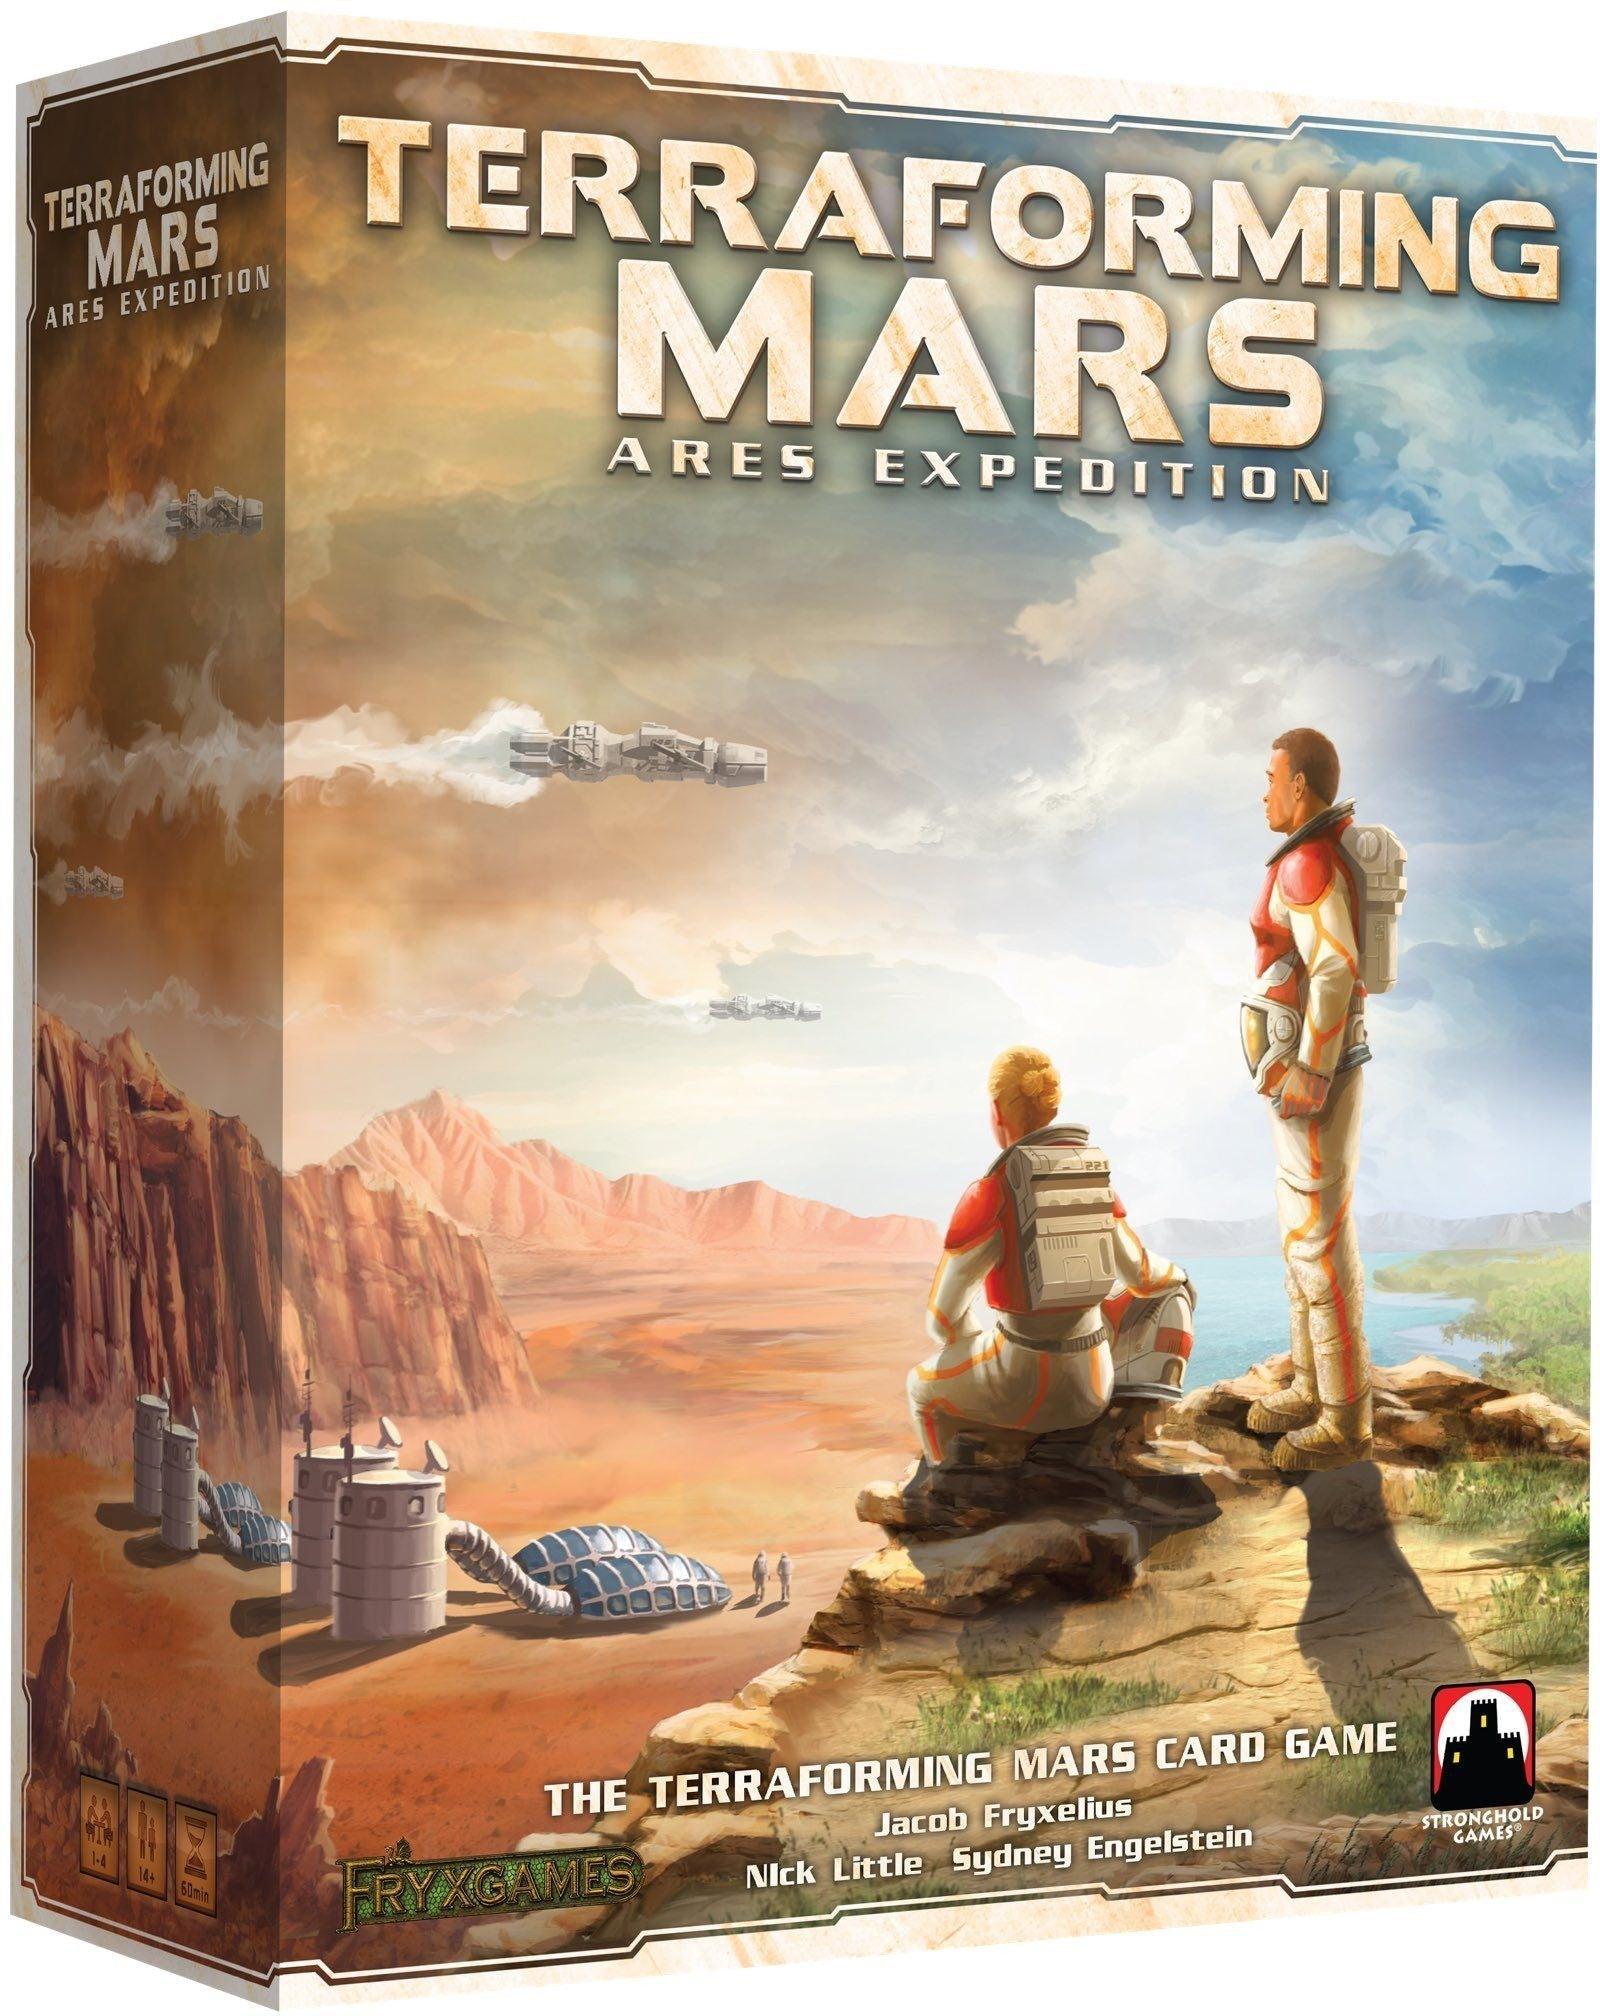 VR-93407 Terraforming Mars Ares Expedition - Stronghold Games - Titan Pop Culture